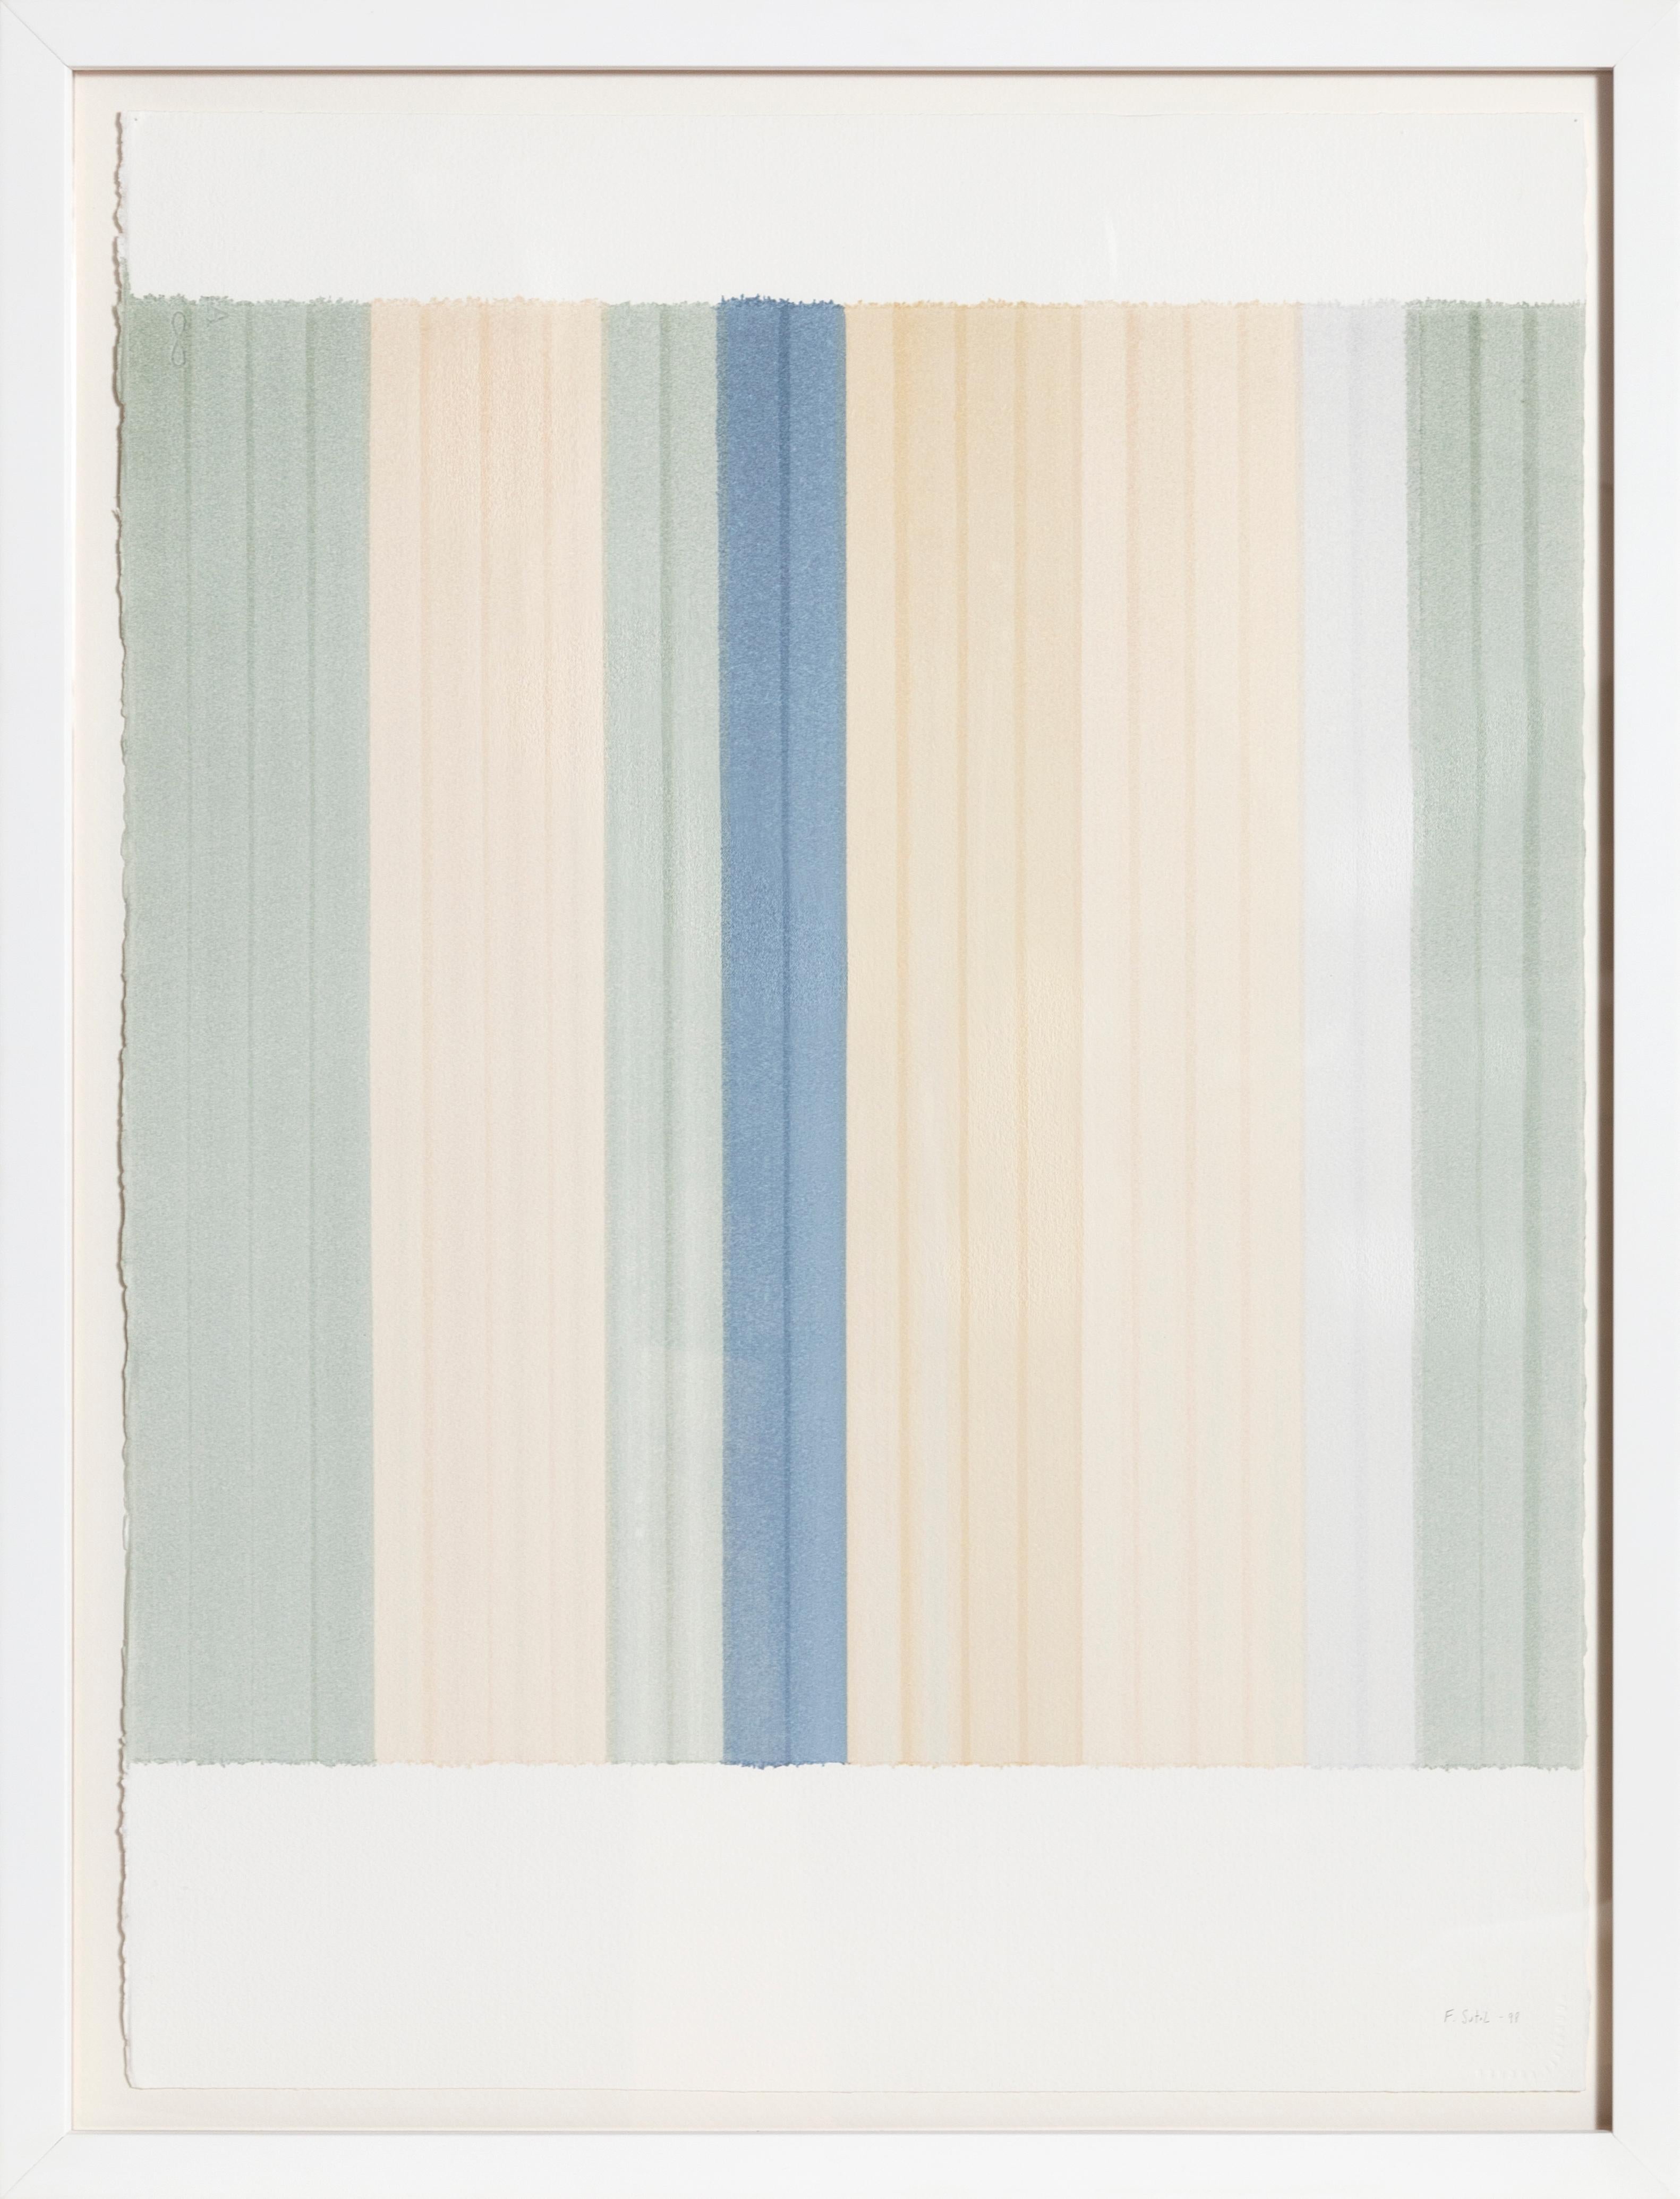 Untitled No. 11, Minimalist Stripe painting by Francisca Sutil